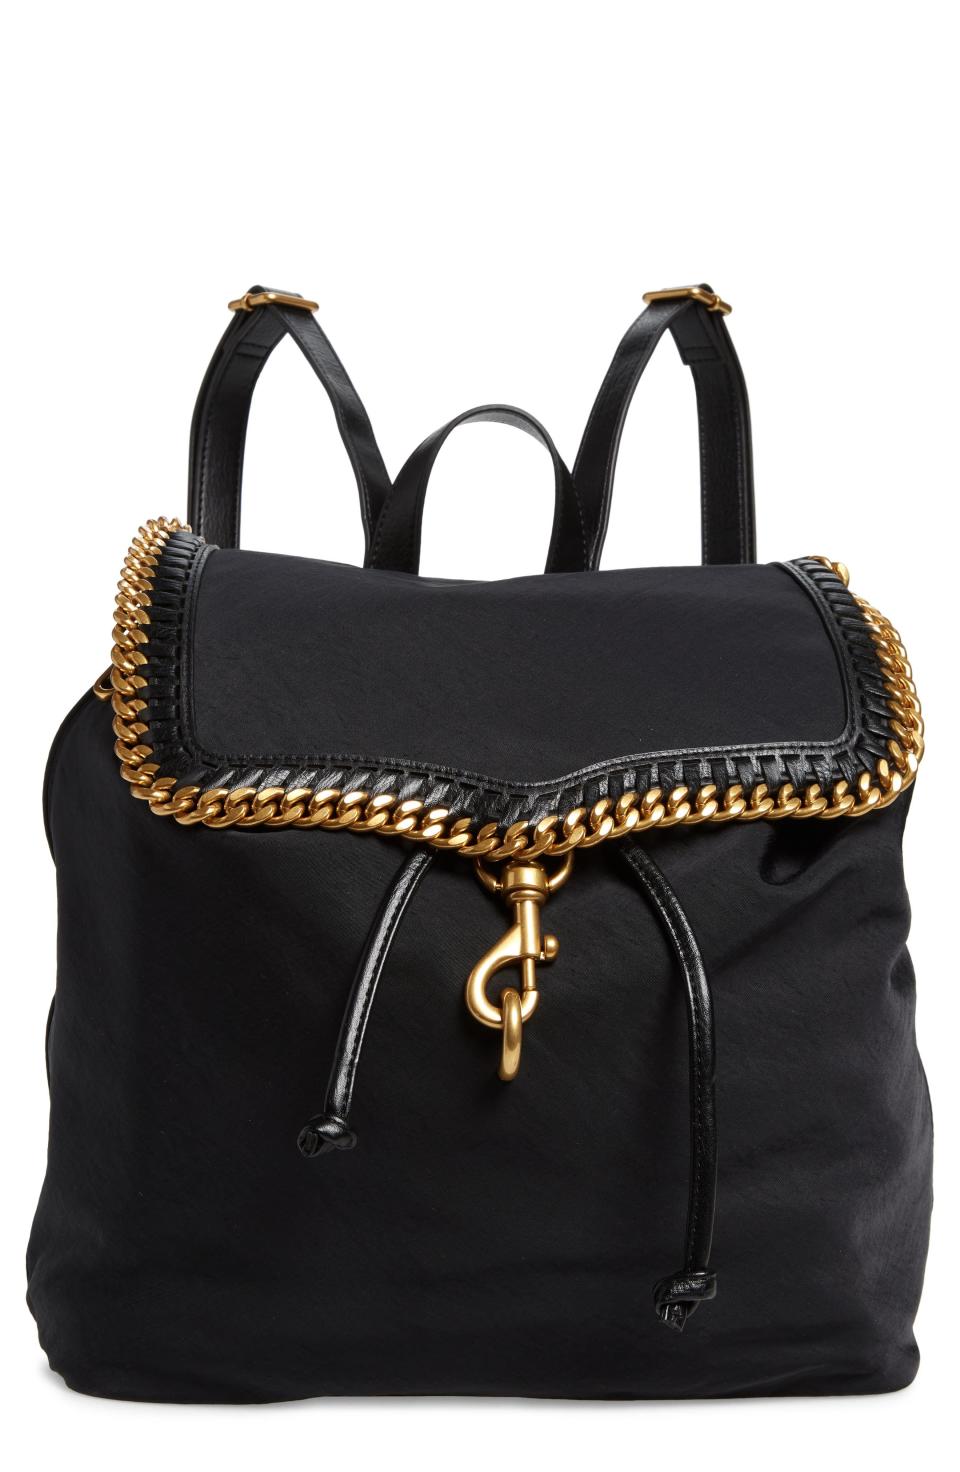 12) Woven Chain Backpack